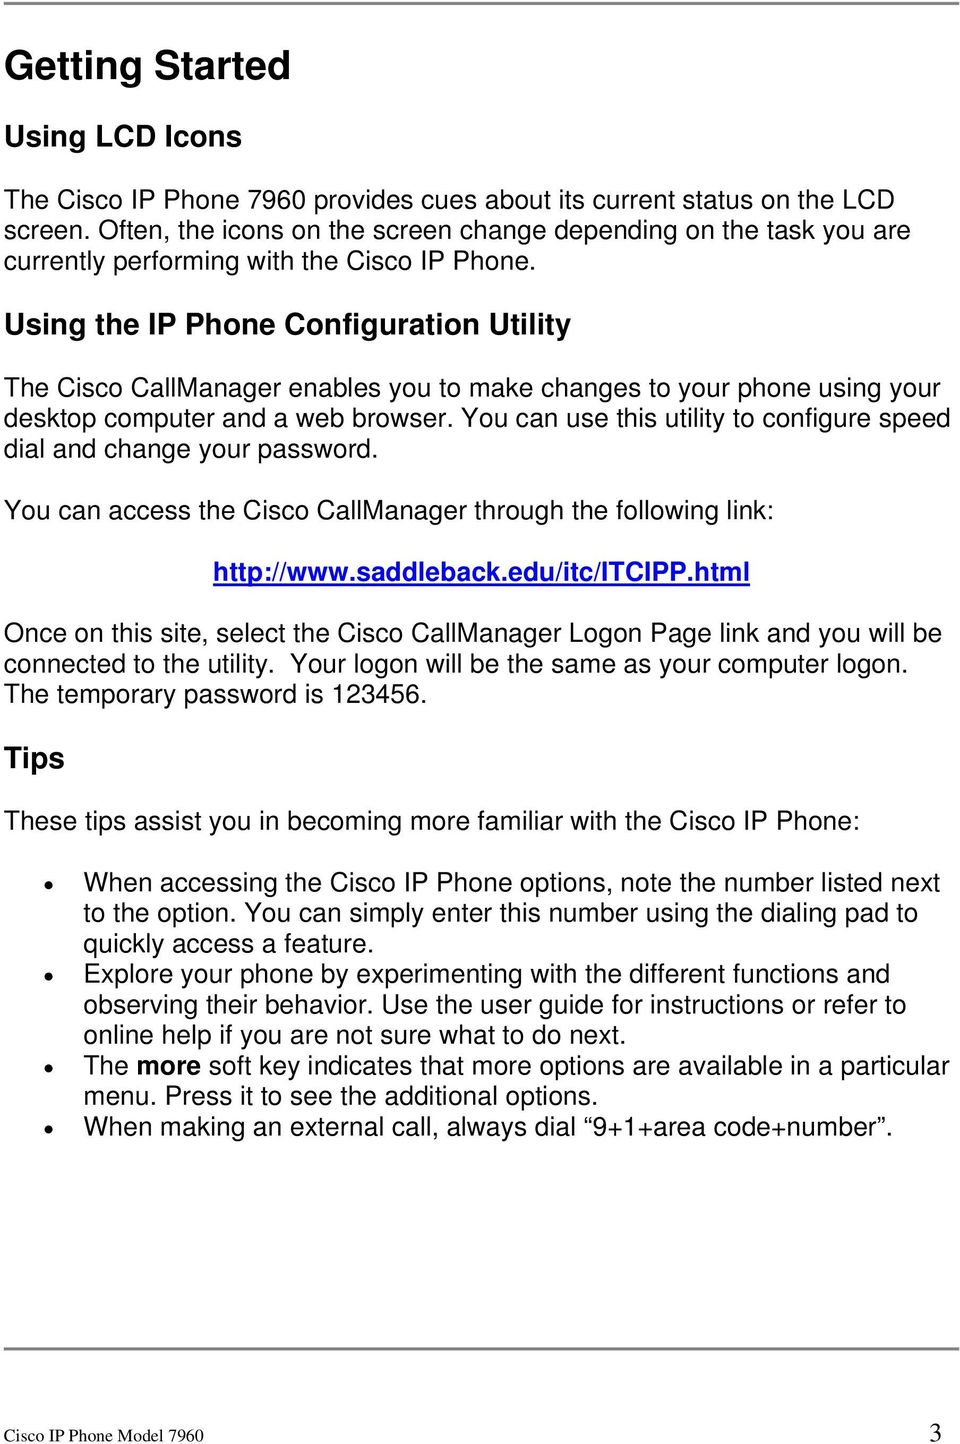 Using the IP Phone Configuration Utility The Cisco CallManager enables you to make changes to your phone using your desktop computer and a web browser.